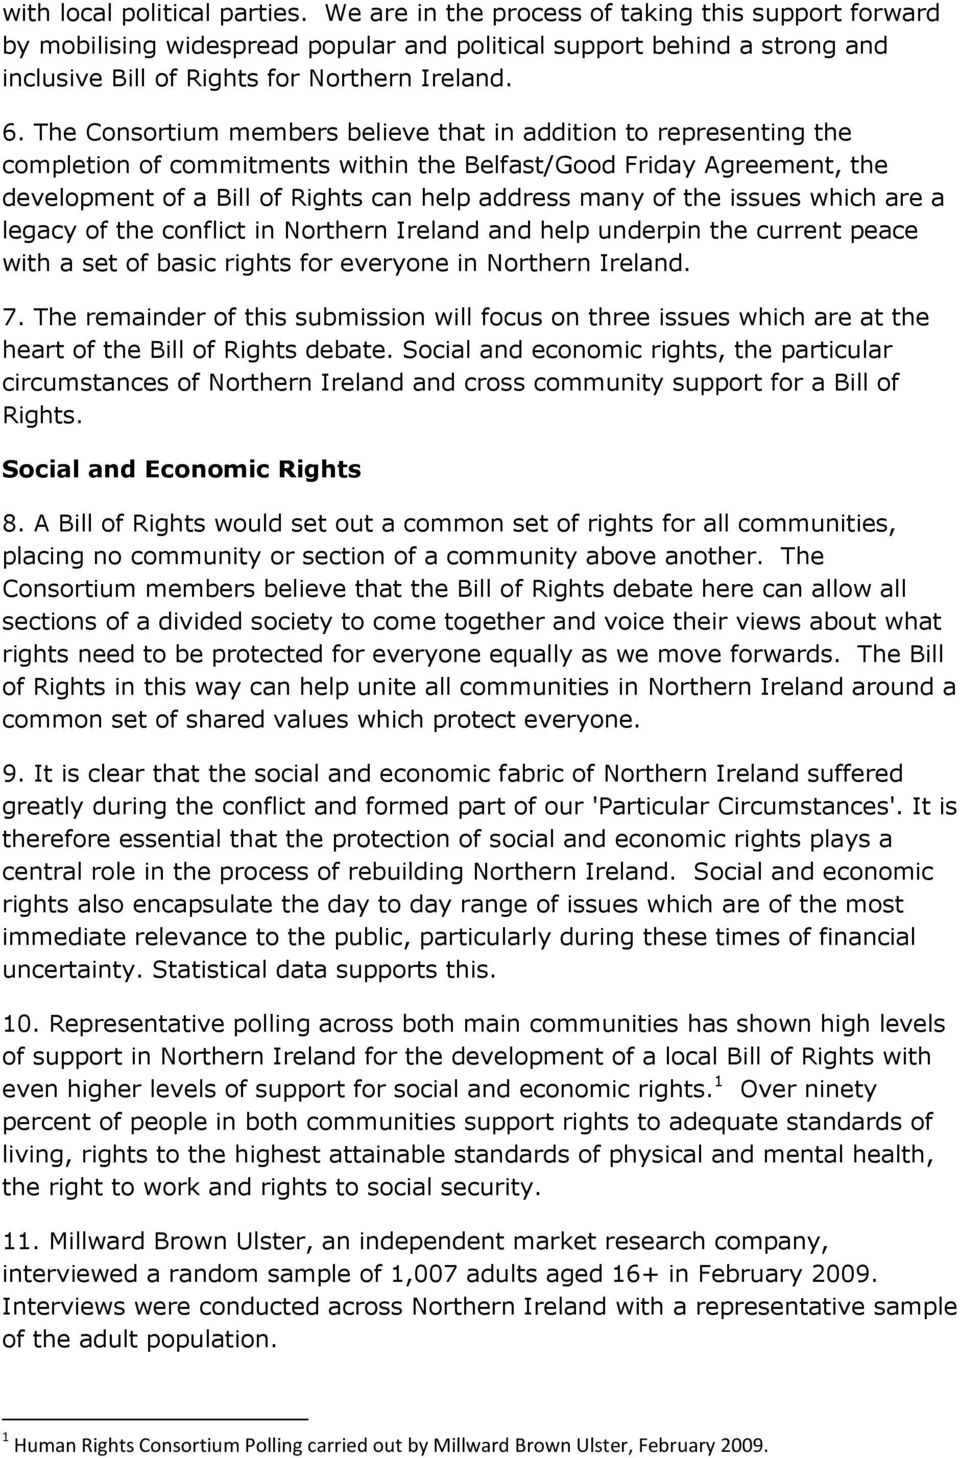 The Consortium members believe that in addition to representing the completion of commitments within the Belfast/Good Friday Agreement, the development of a Bill of Rights can help address many of